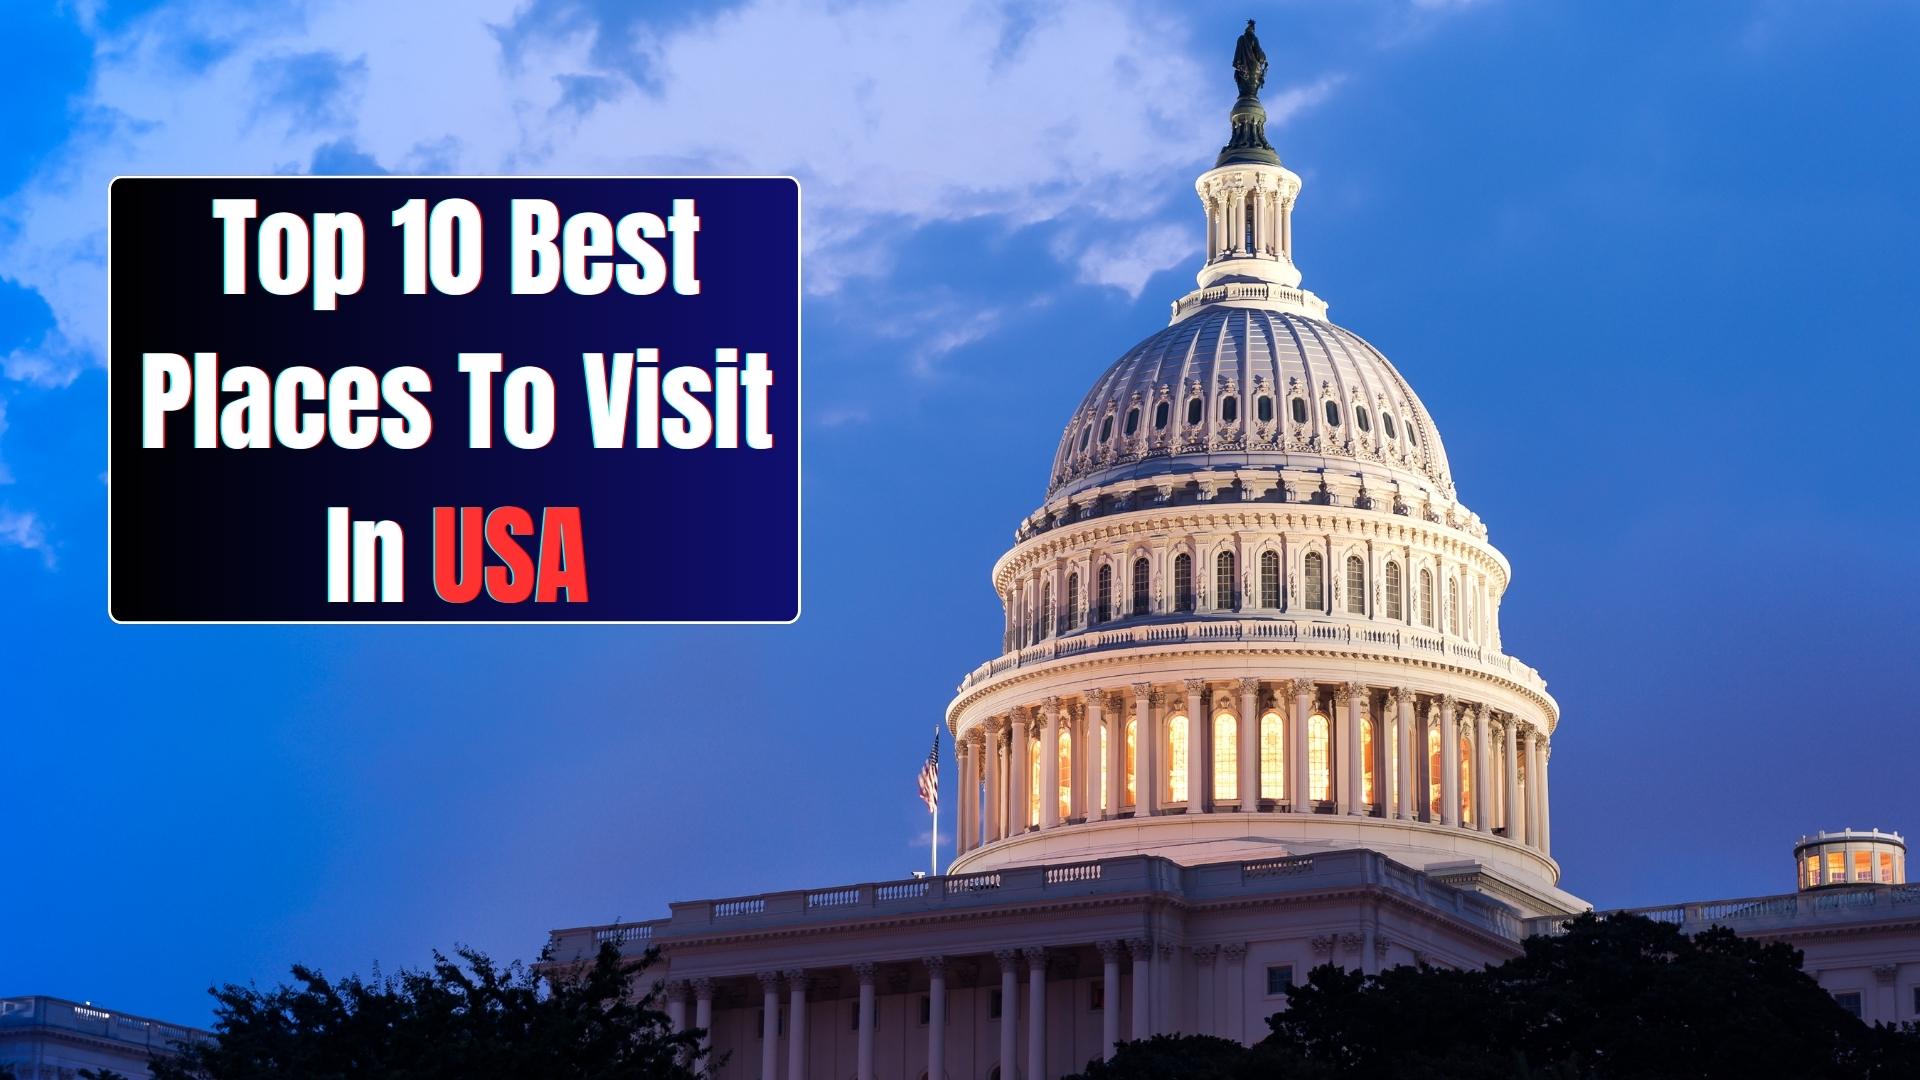 Top 10 Best Places To Visit In USA, Buzz On Net